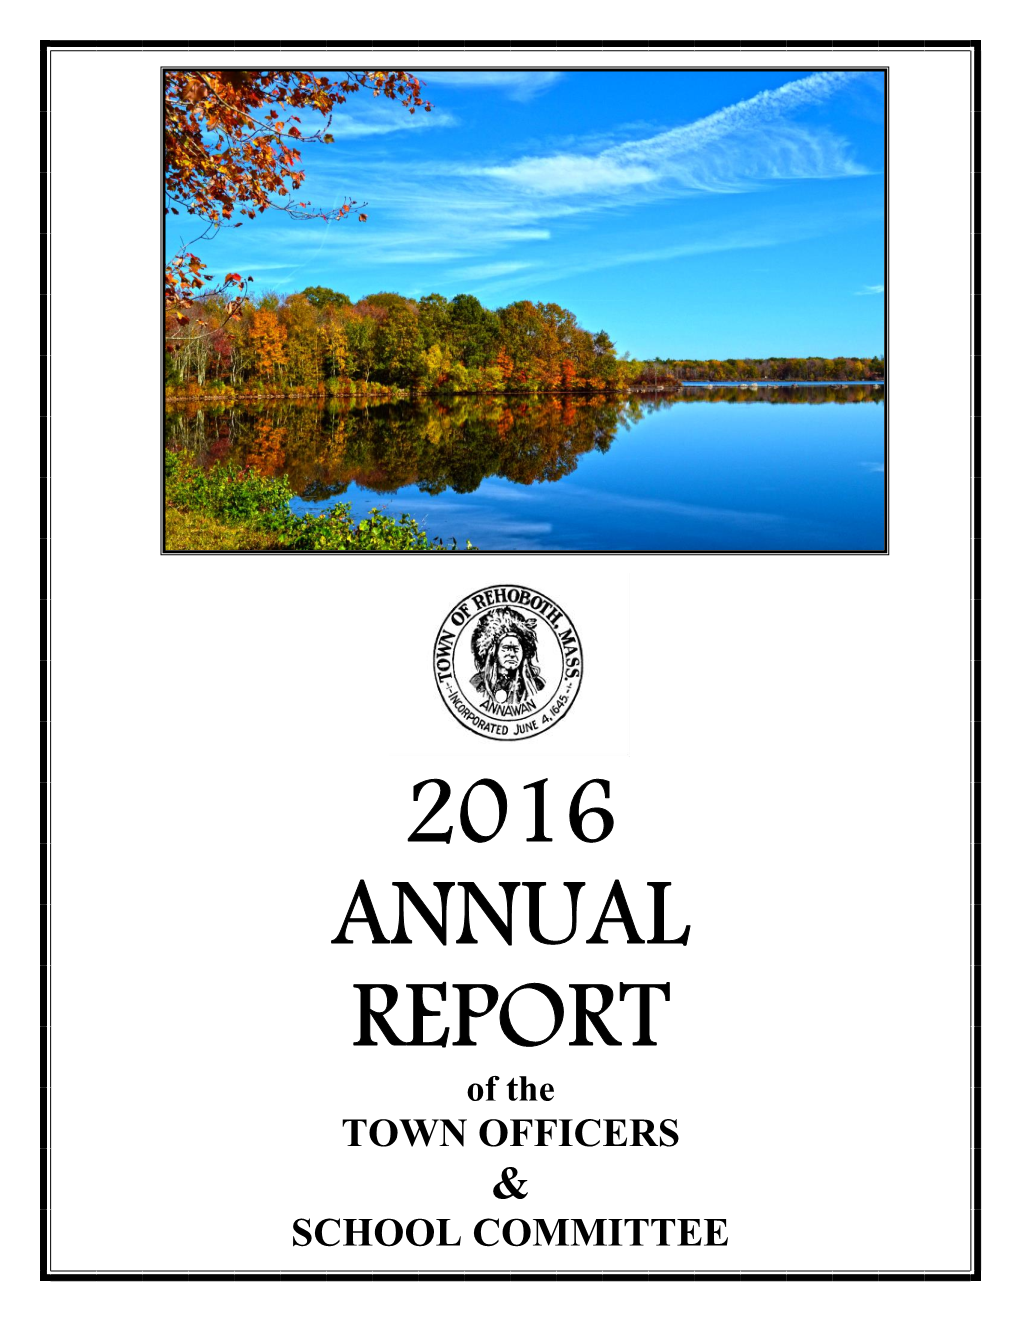 2016 ANNUAL REPORT of the TOWN OFFICERS & SCHOOL COMMITTEE